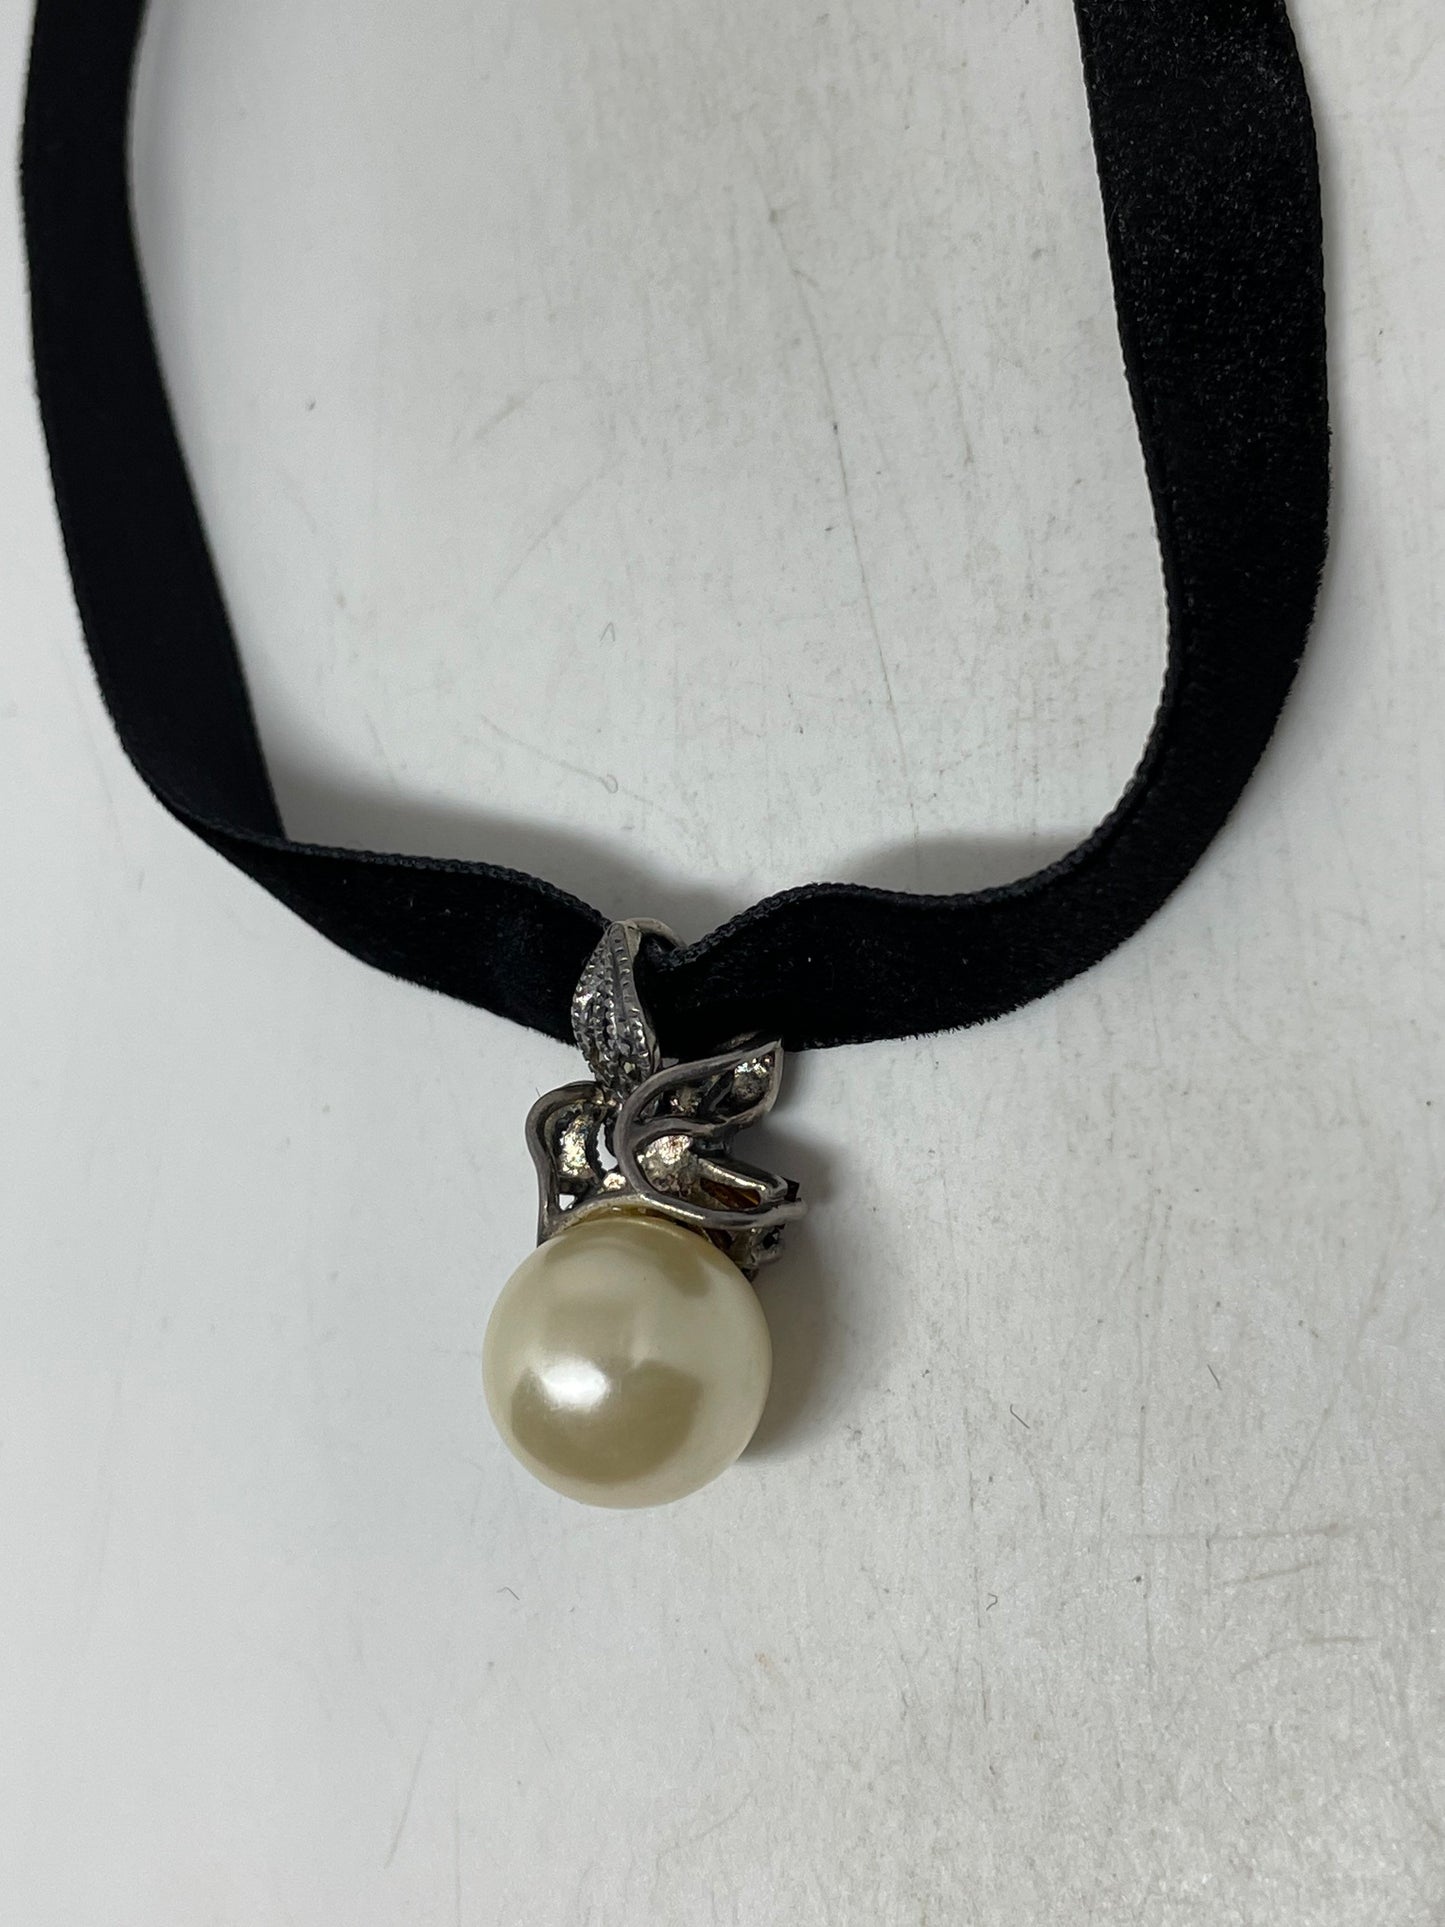 Vintage White Sapphire 925 Sterling Silver Mother of Pearl Dangle Pendant Necklace